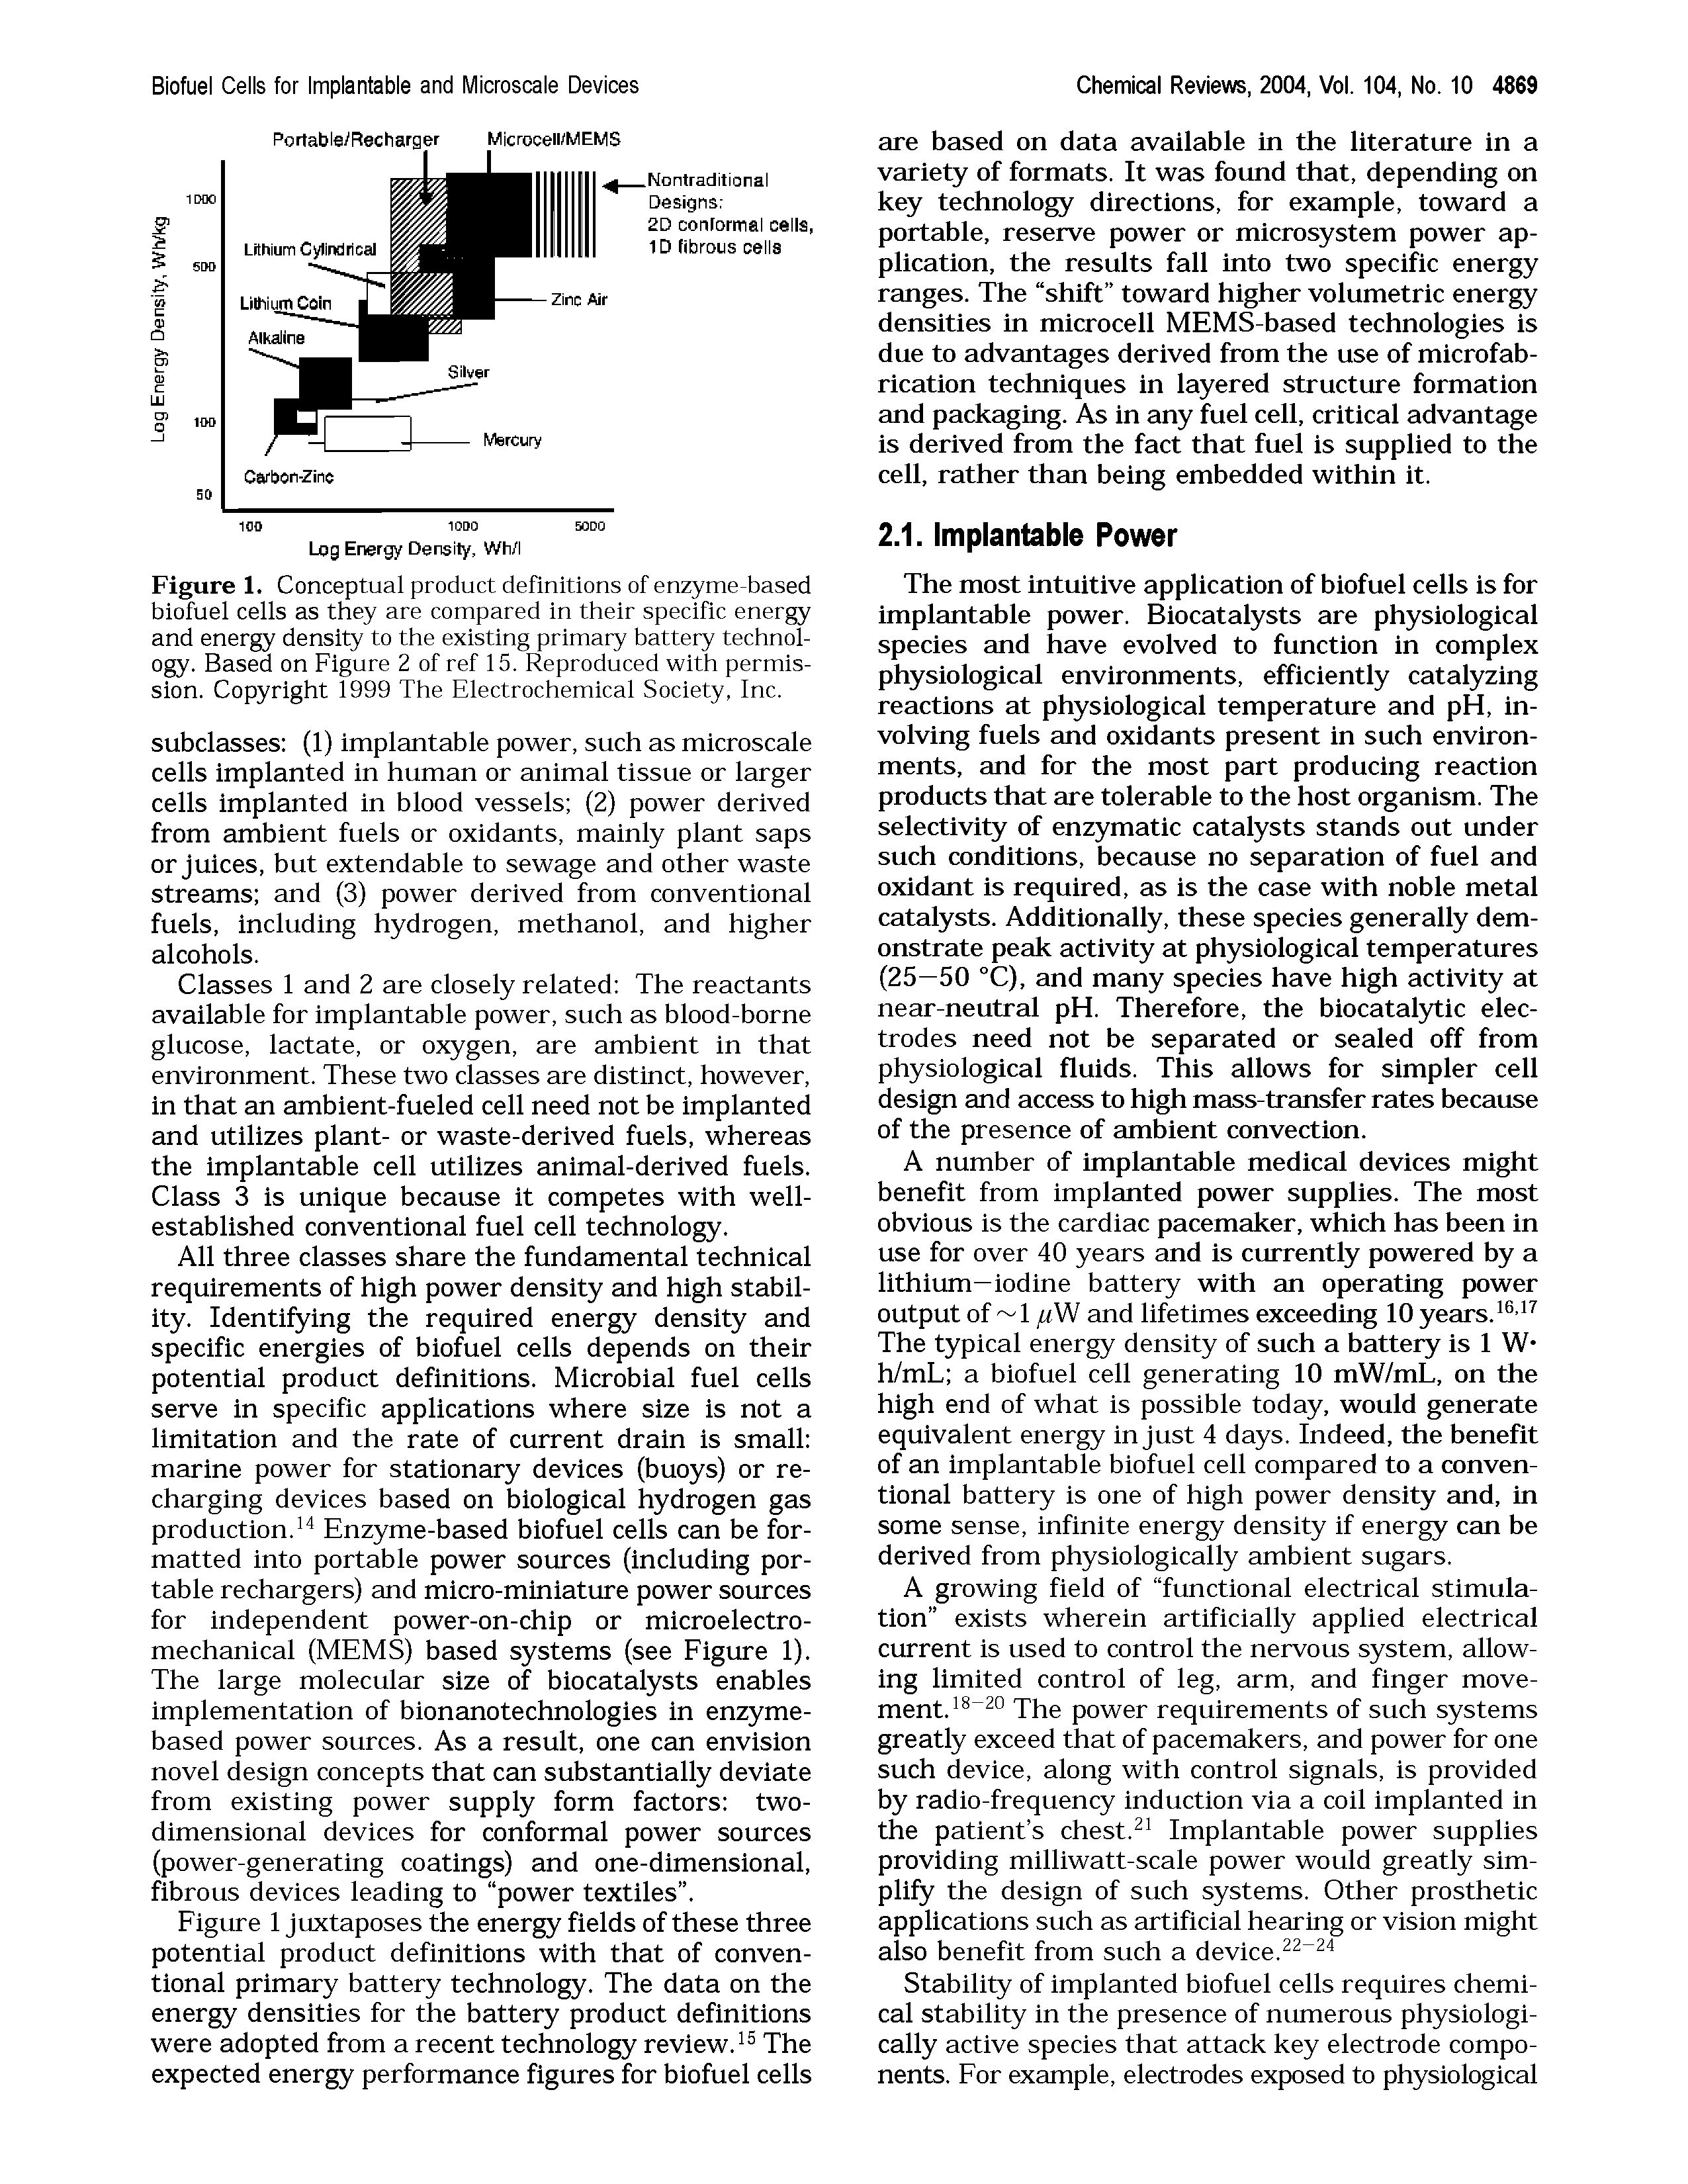 Figure 1. Conceptual product definitions of enzyme-based biofuel cells as they are compared in their specific energy and energy density to the existing primary battery technology. Based on Figure 2 of ref 15. Reproduced with permission. Copyright 1999 The Electrochemical Society, Inc.